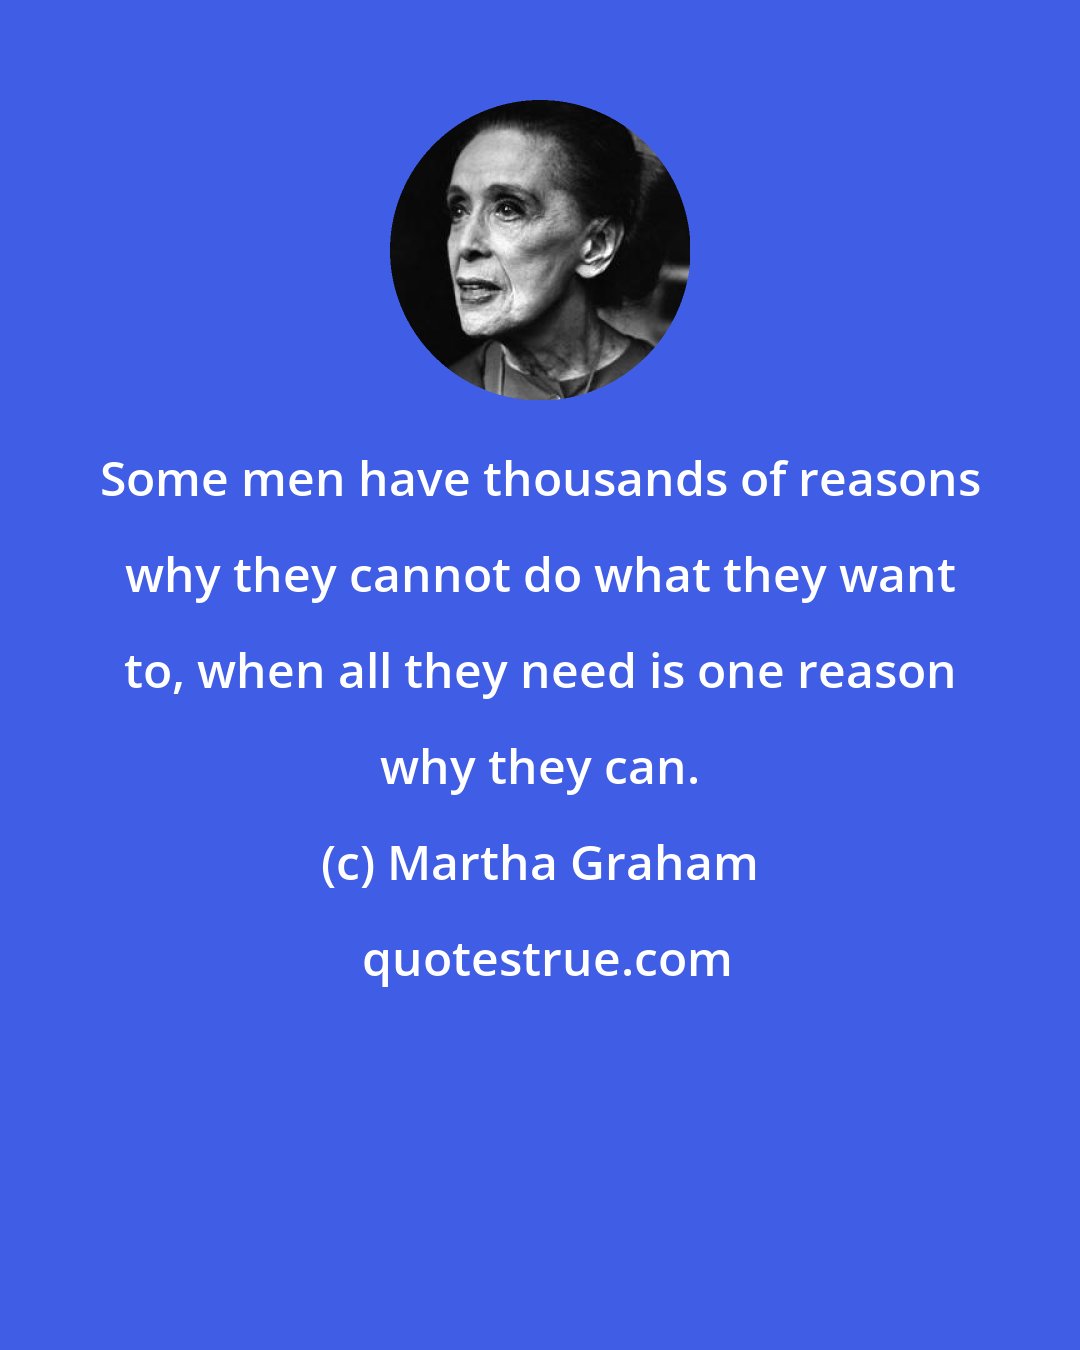 Martha Graham: Some men have thousands of reasons why they cannot do what they want to, when all they need is one reason why they can.